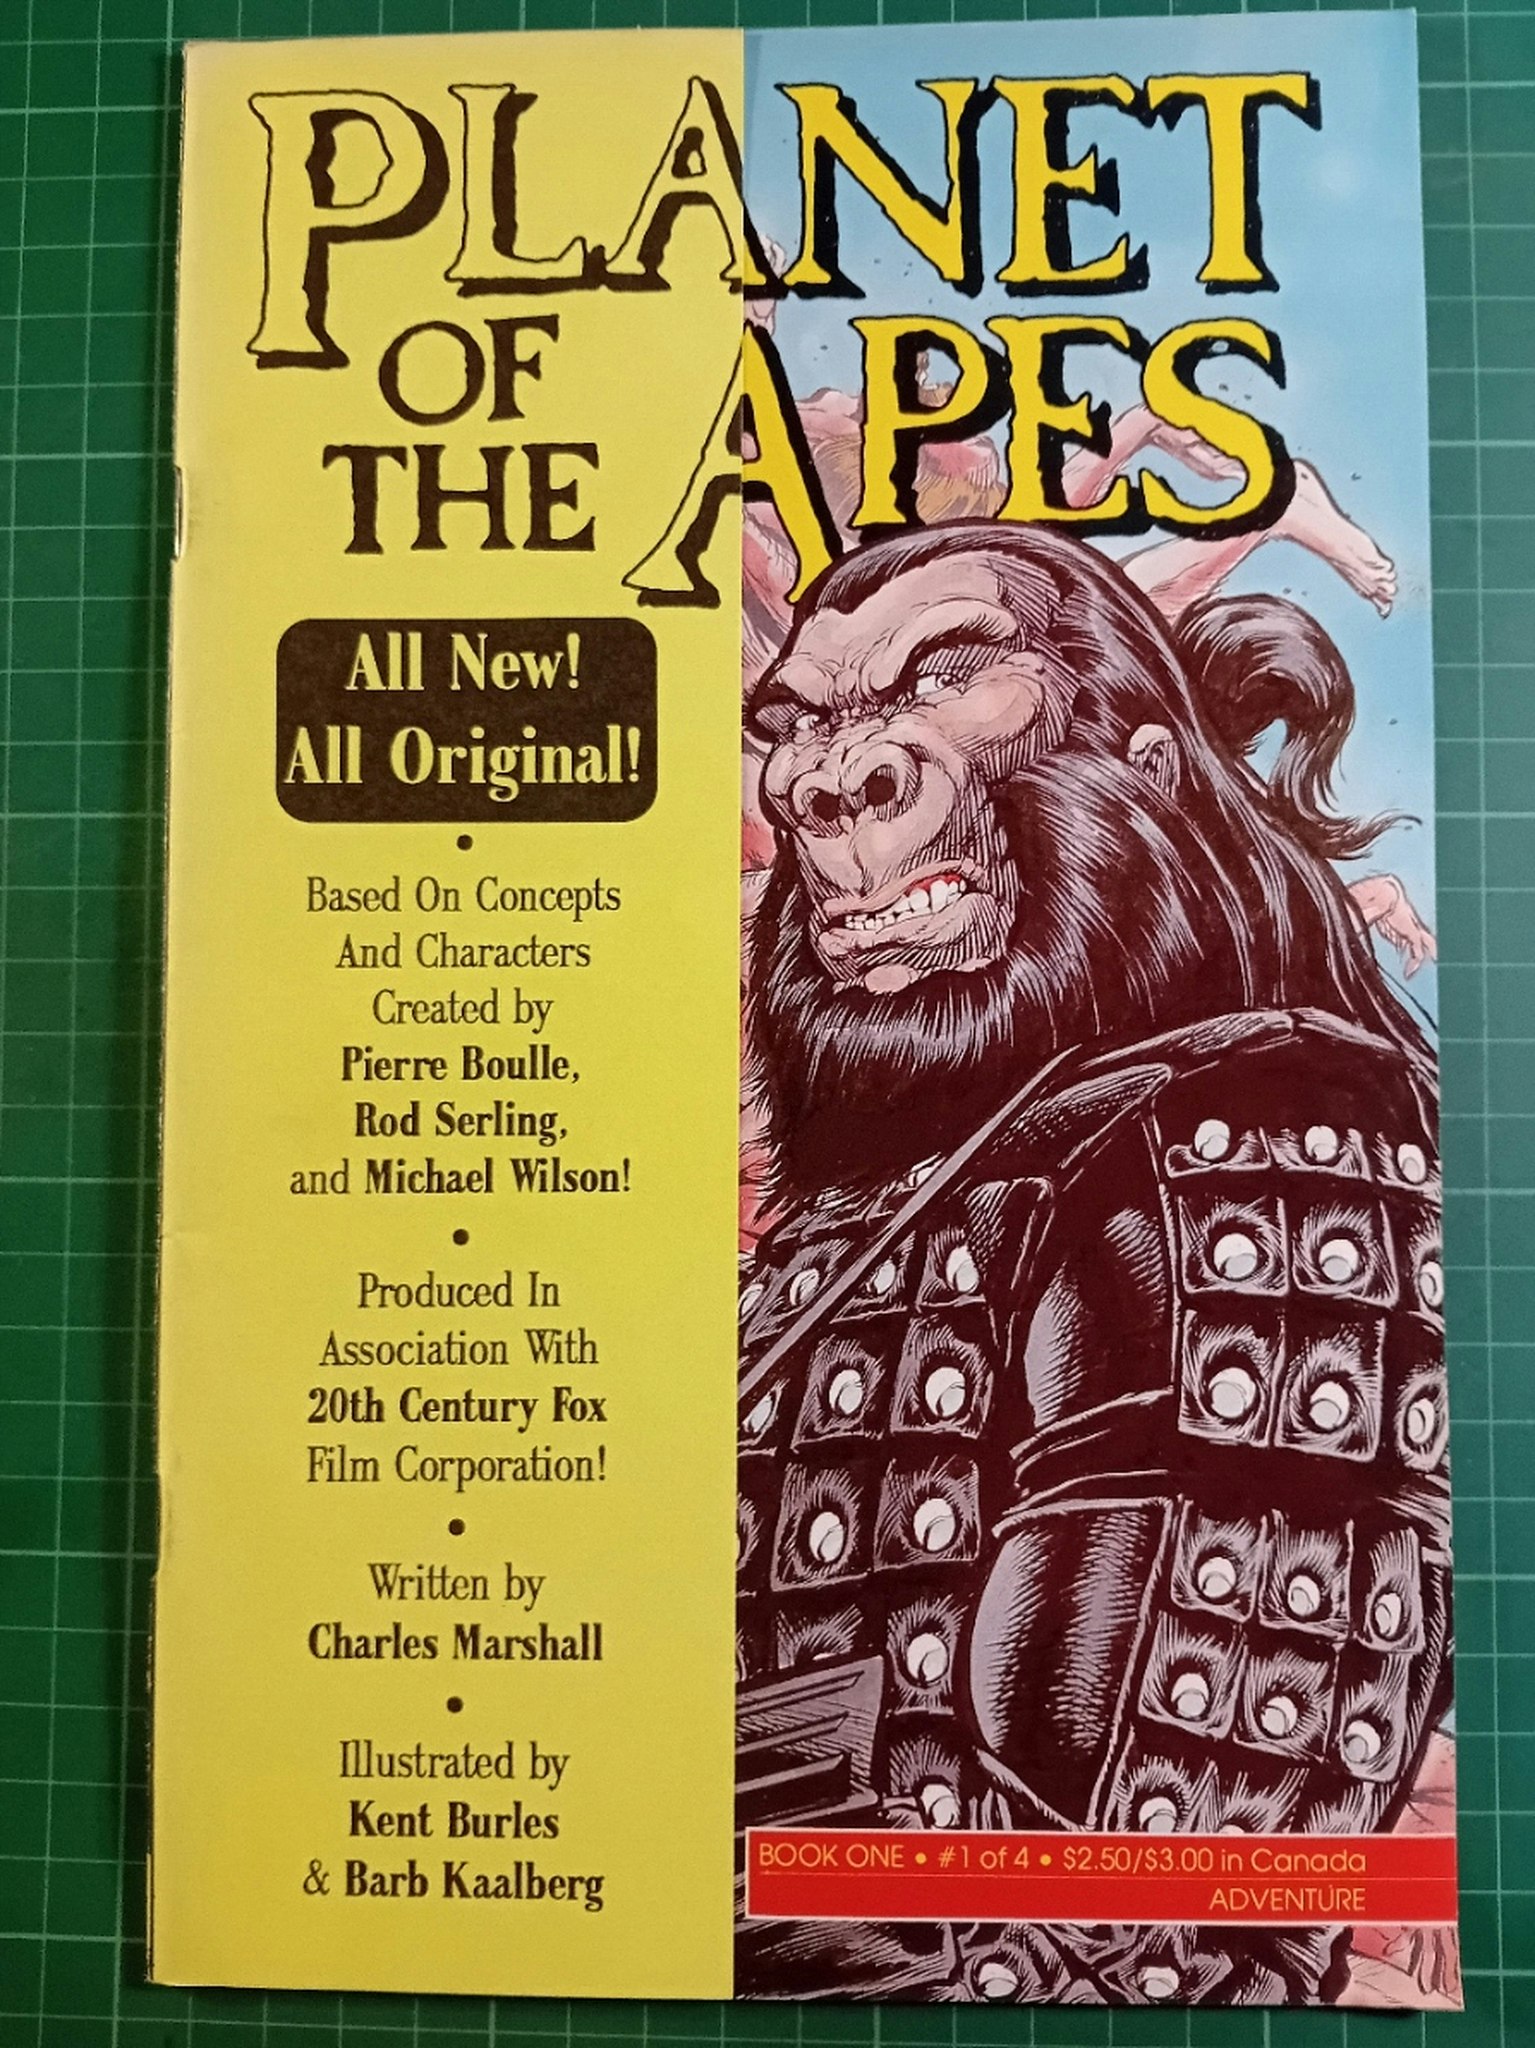 Planet of the apes #01